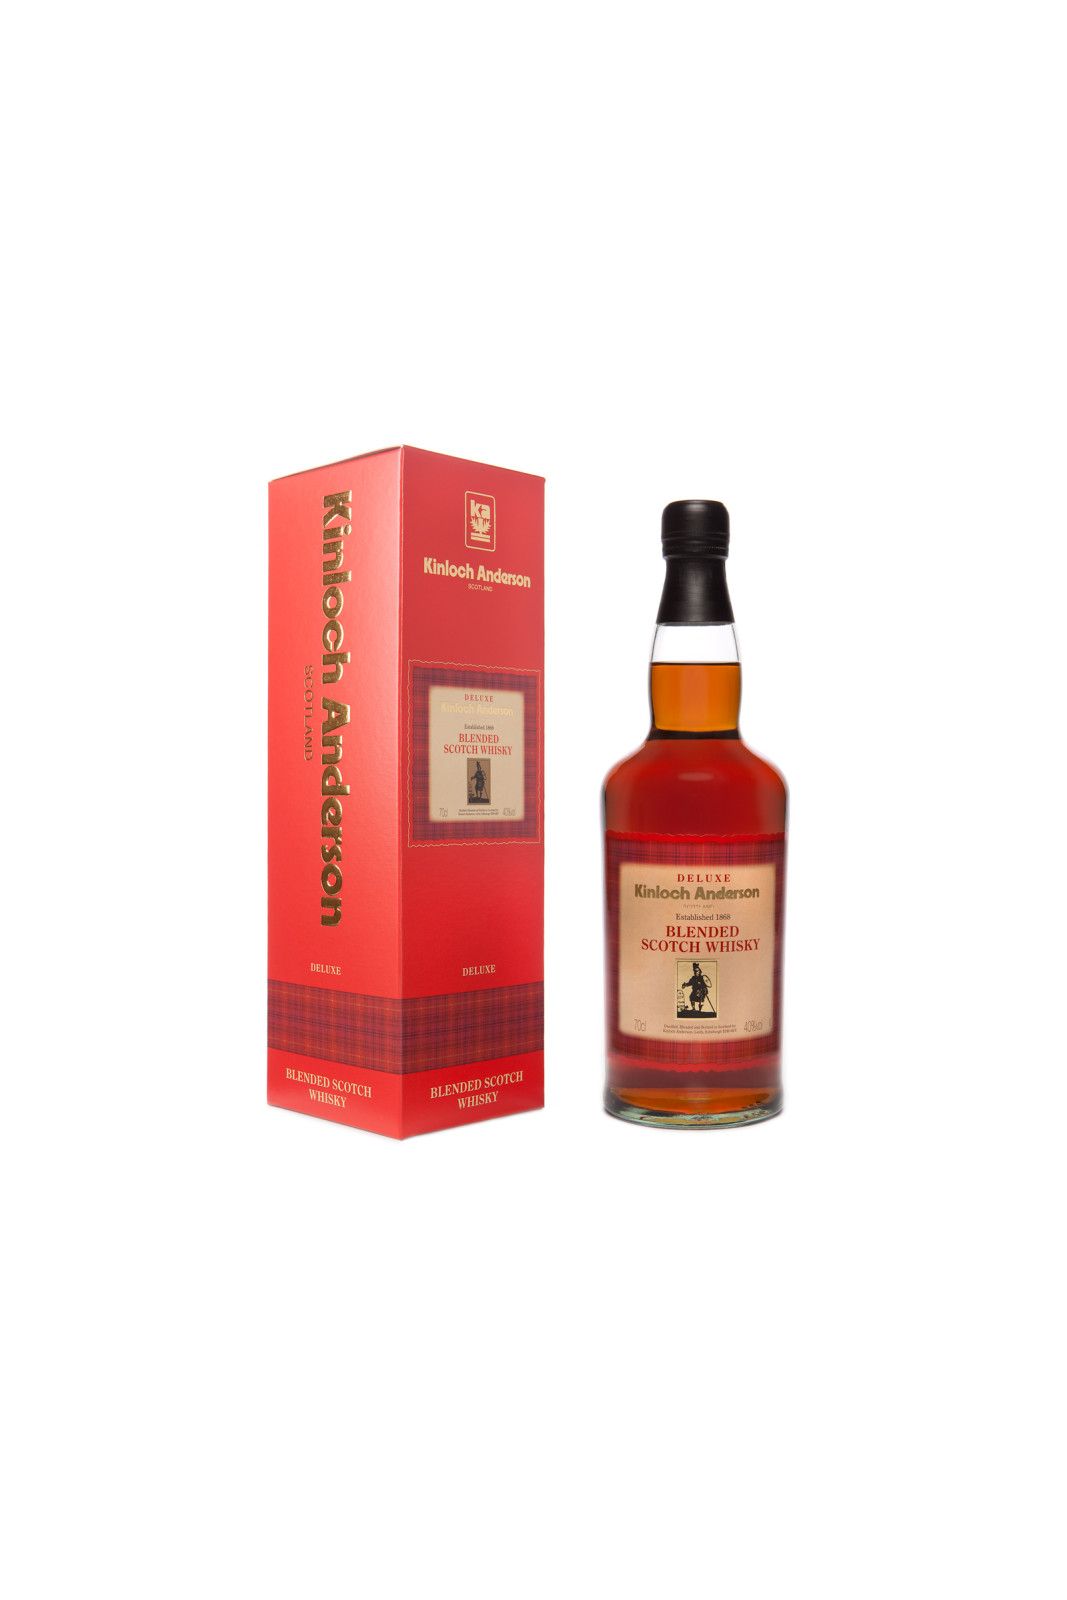 Kinloch Anderson Deluxe Blended Scotch Whisky - REDUCED TO CLEAR